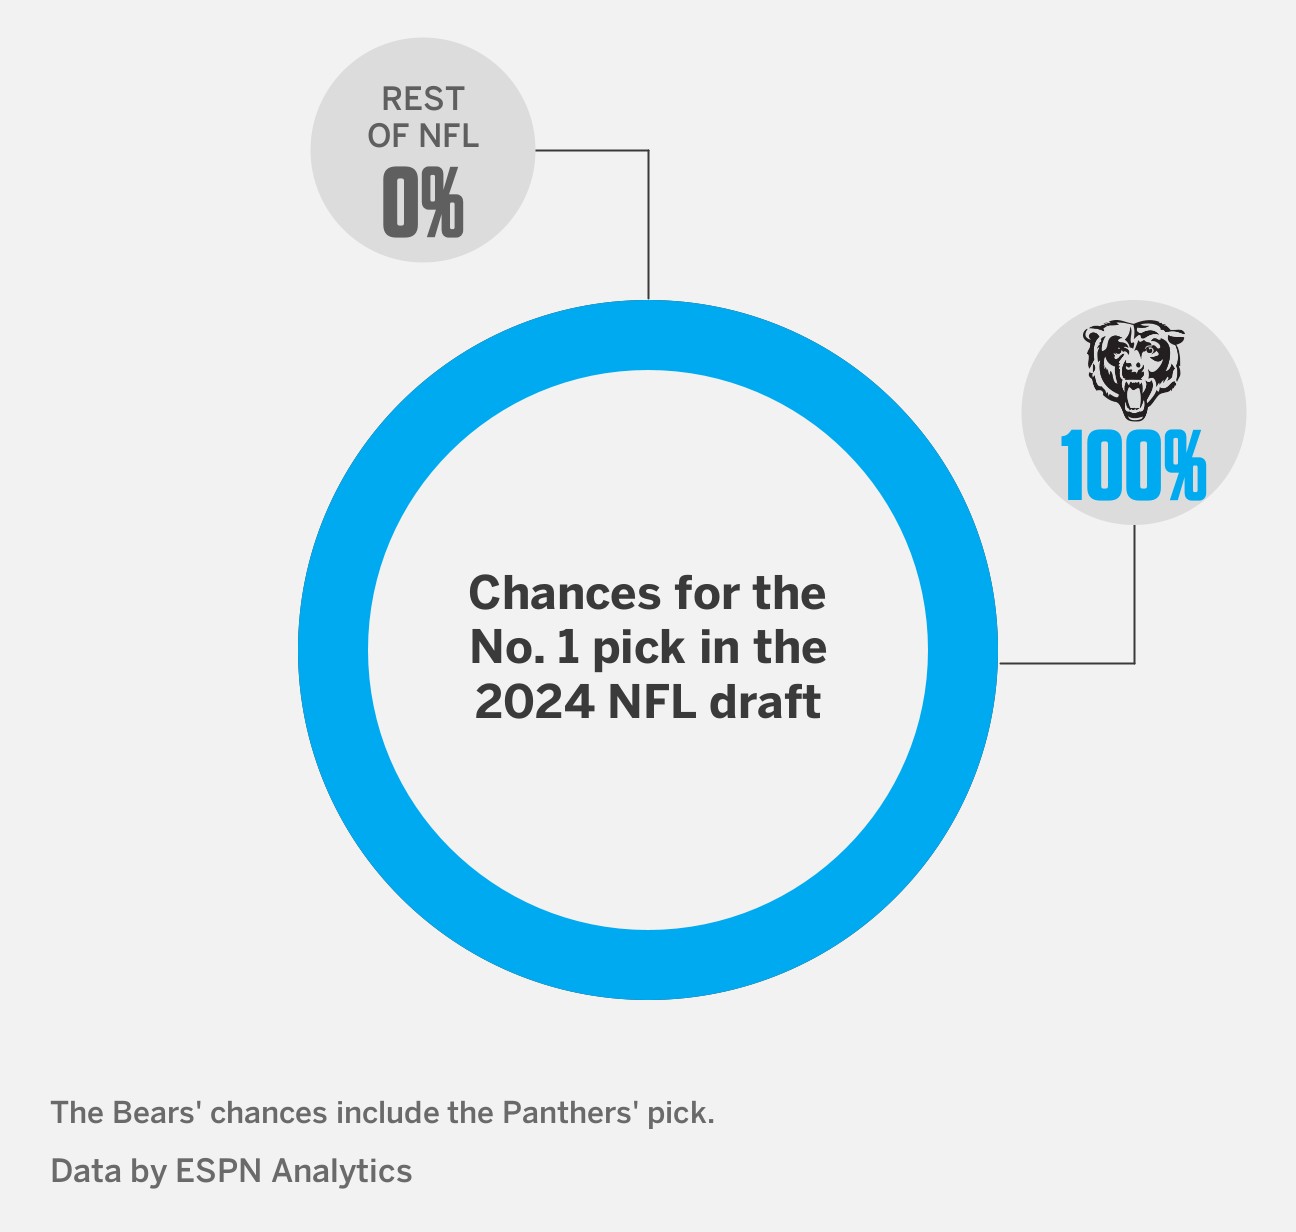 NFL Teams' Playoff Chances: Can the New England Patriots make the 2022/23  Playoffs?